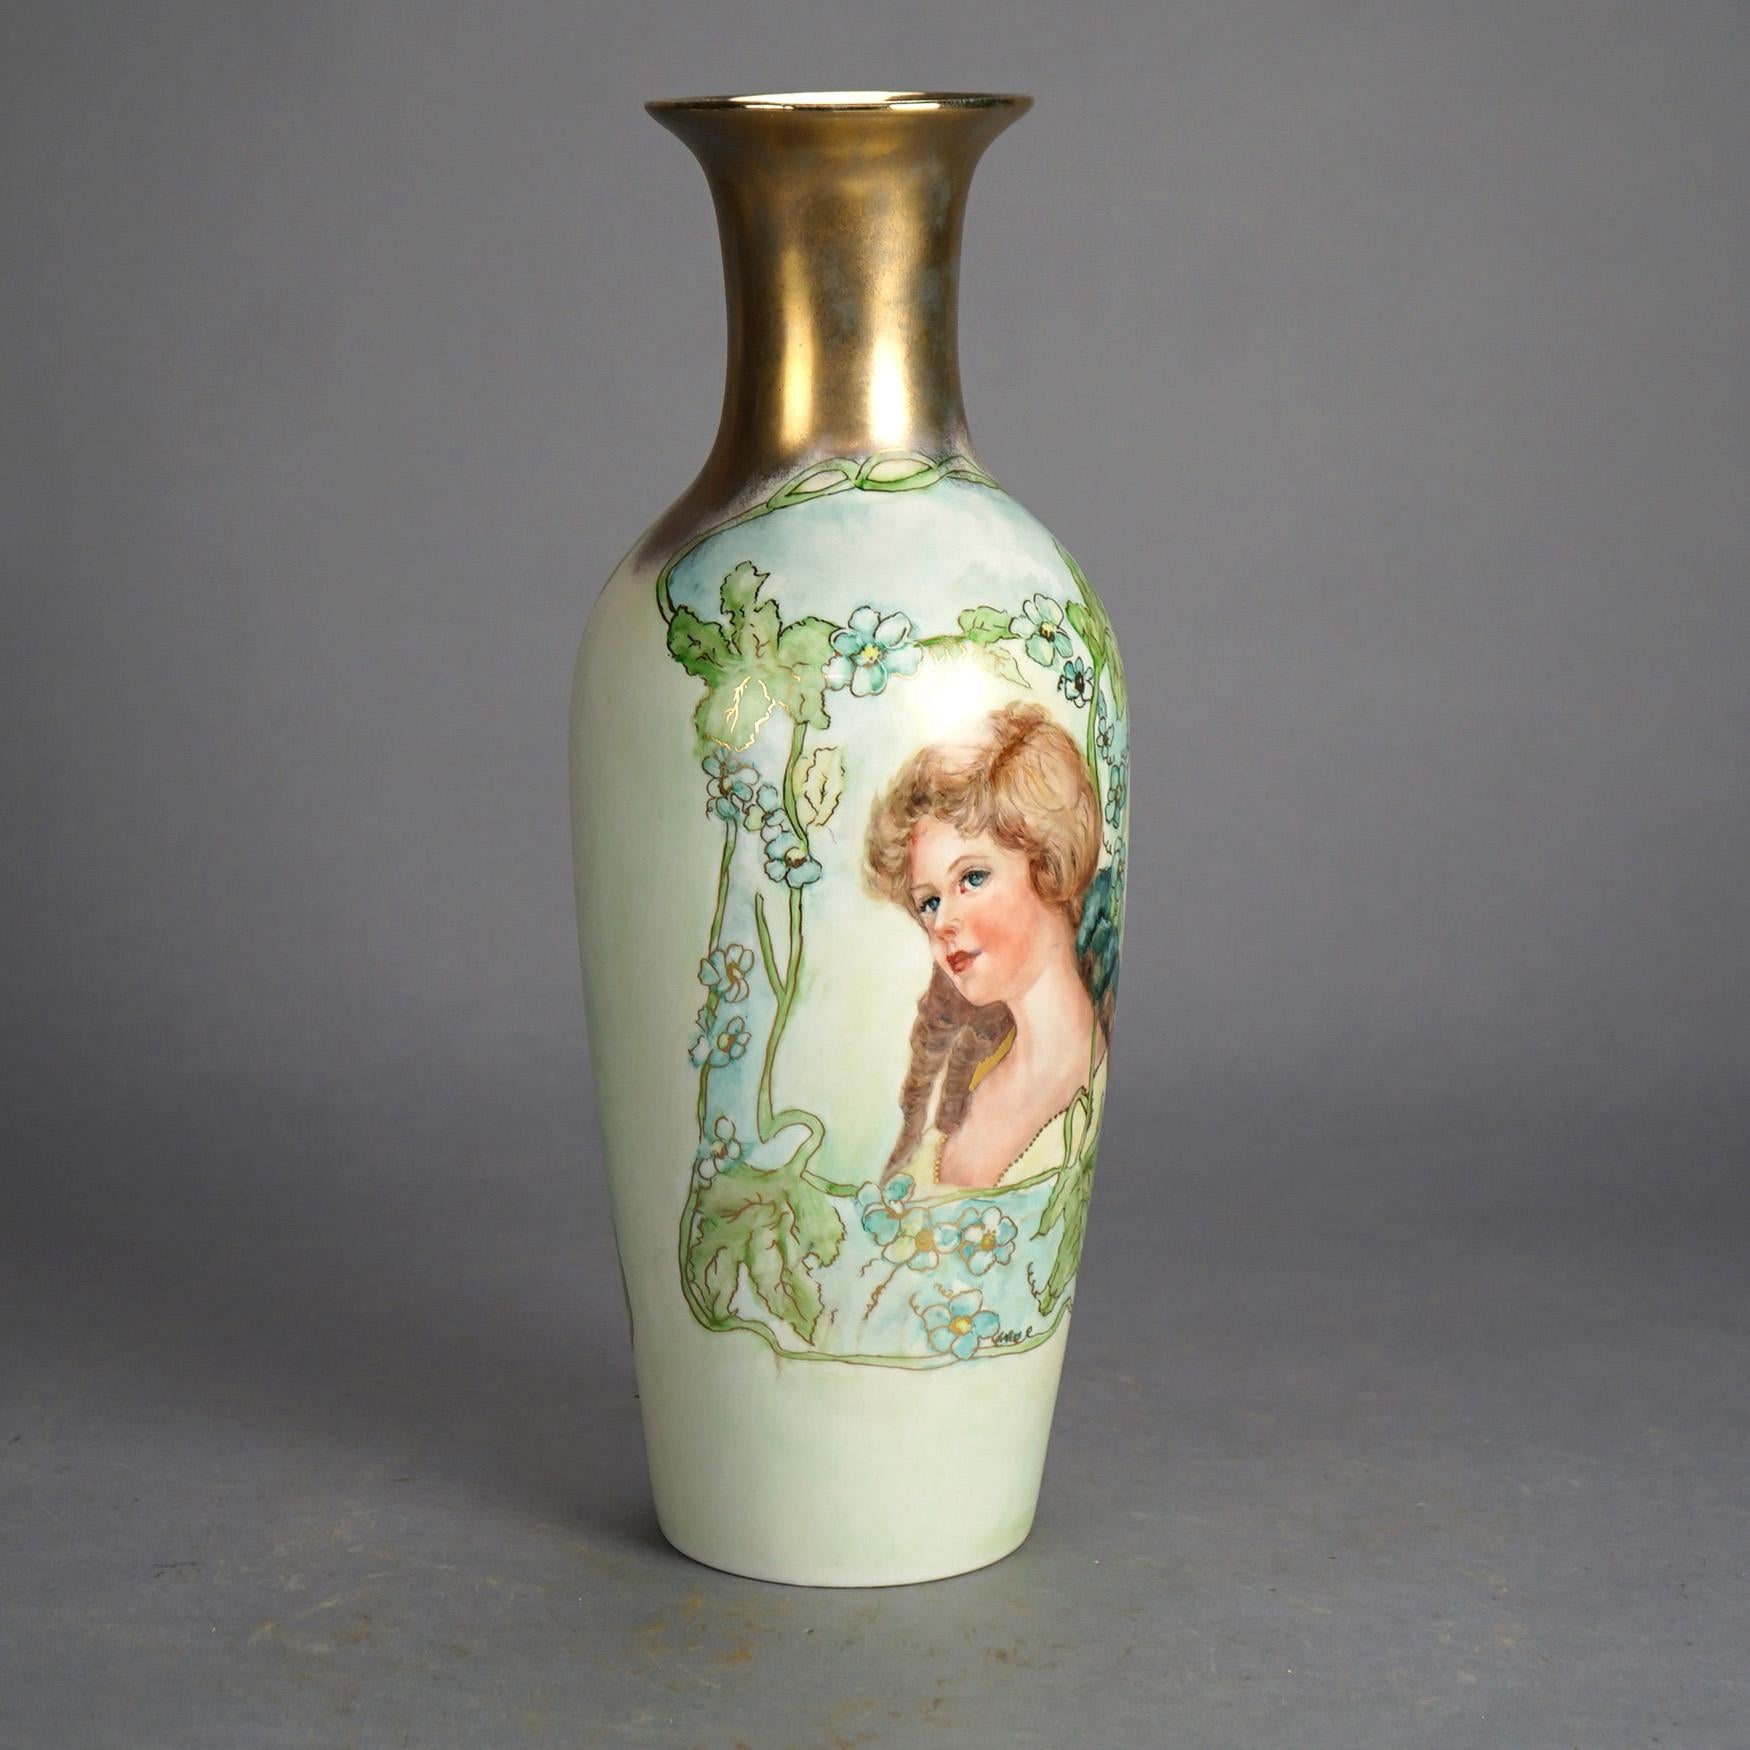 Antique French Limoges Porcelain Hand Painted & Gilt Portrait Vase with Young Woman and Flowers, c1910

Measures- 16.75''H x 6''W x 6''D